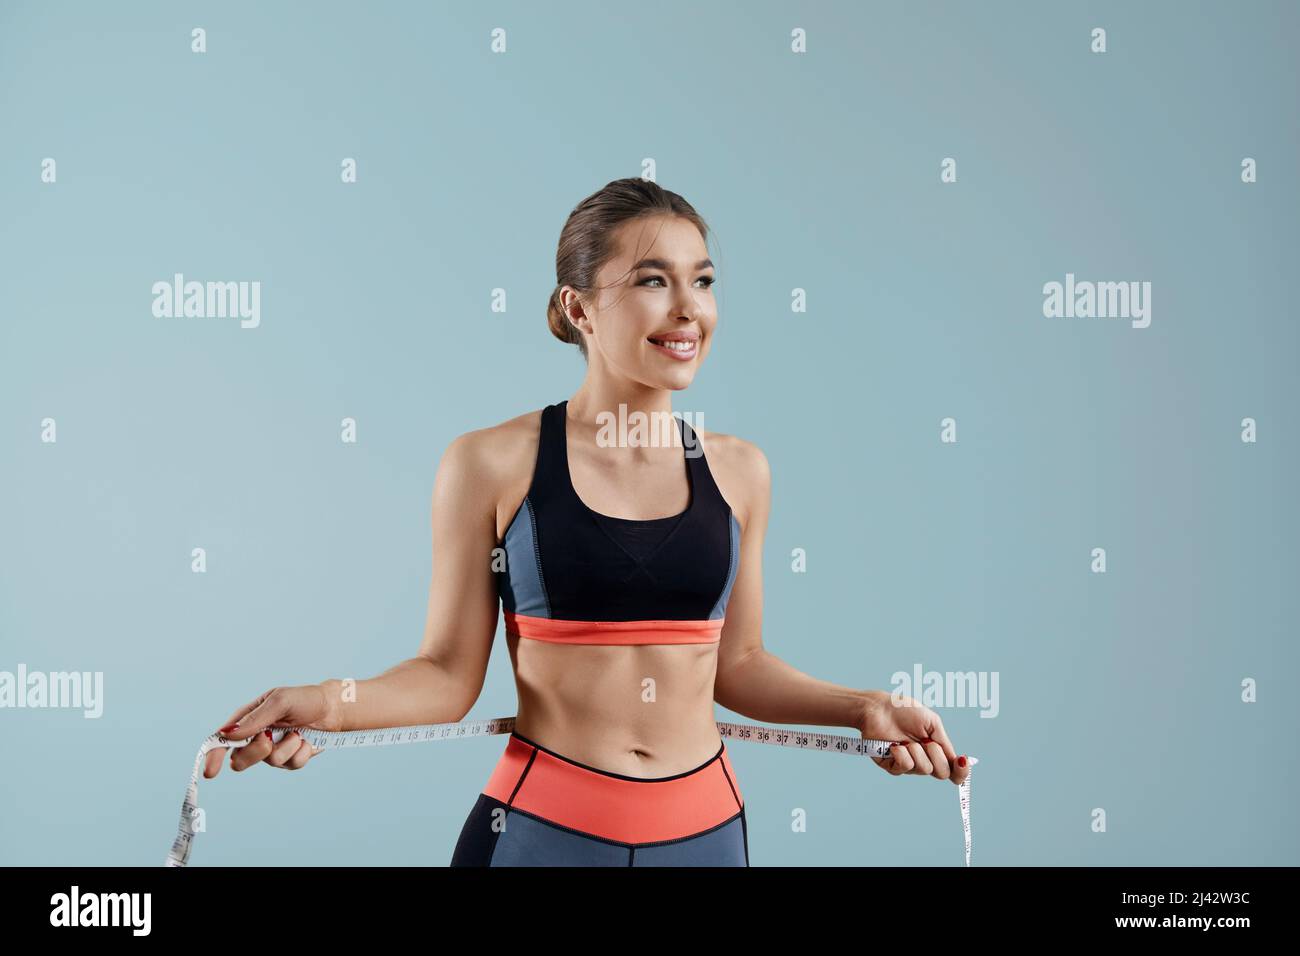 Weight loss, slim body, healthy lifestyle concept. Fit fitness girl measuring her waistline with measure tape. Stock Photo